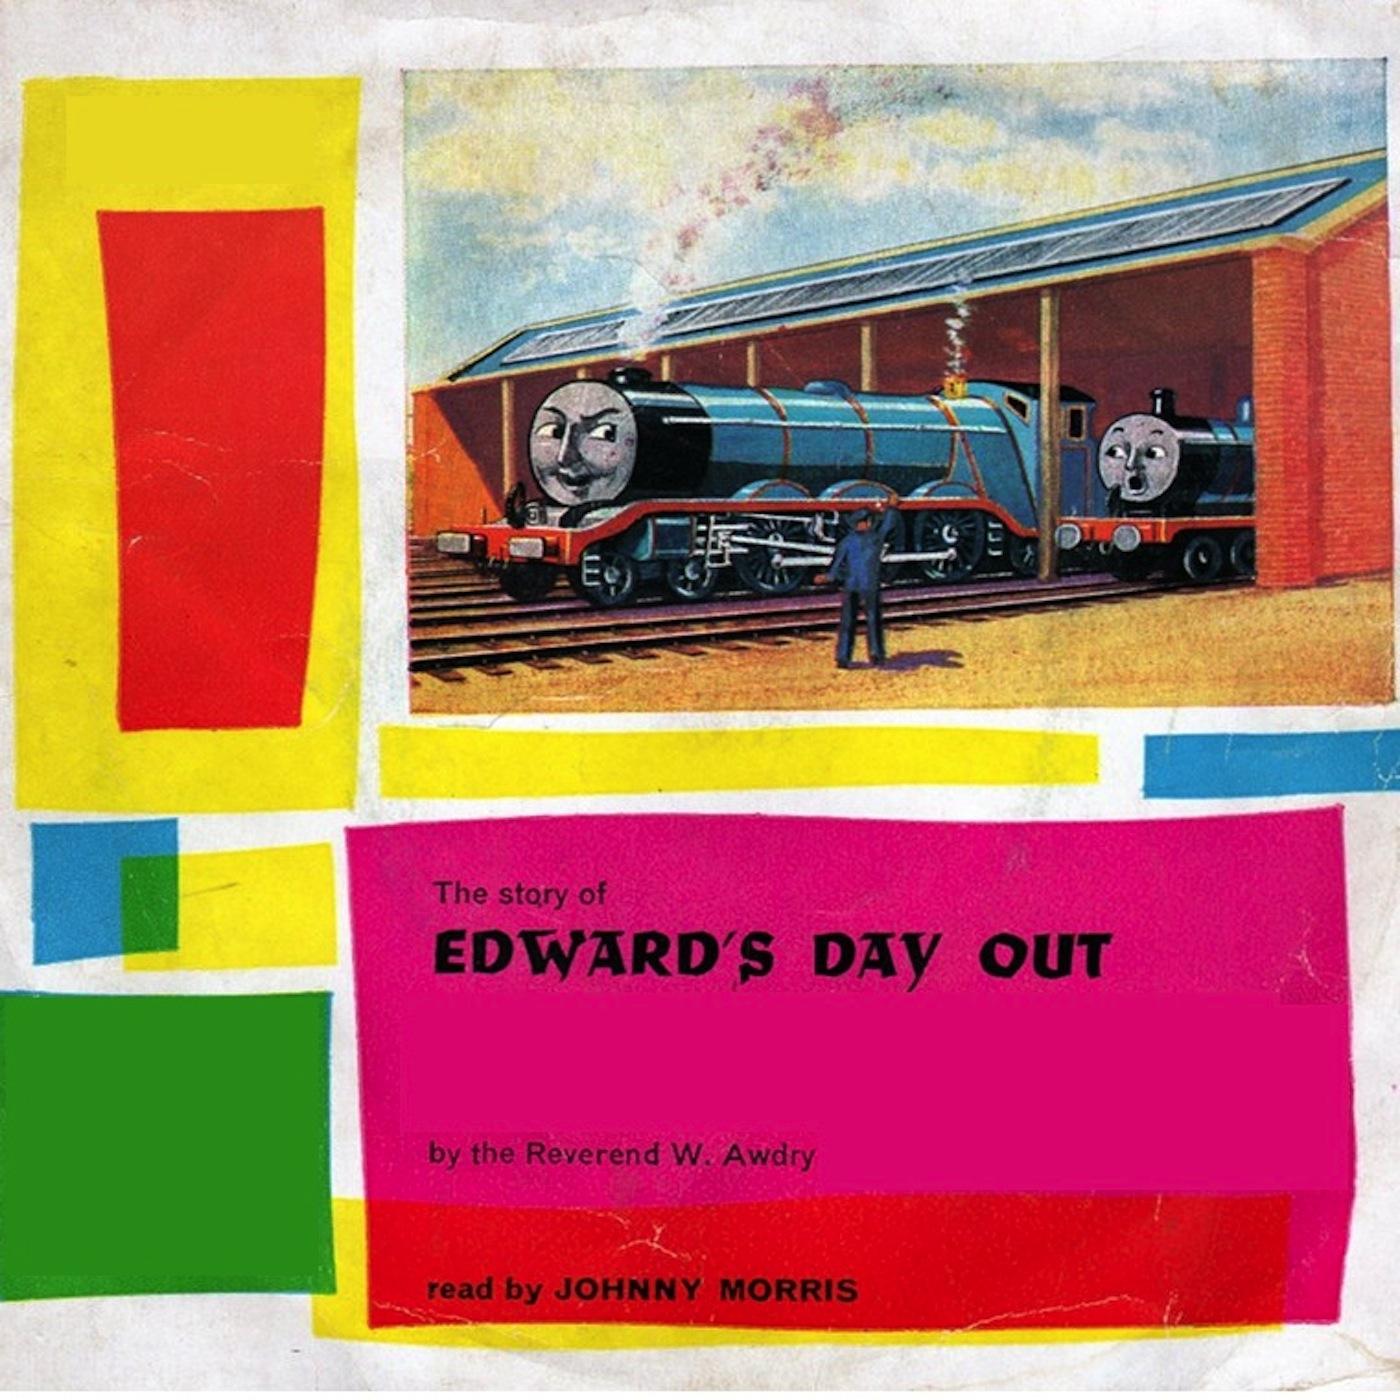 Edward's Day Out